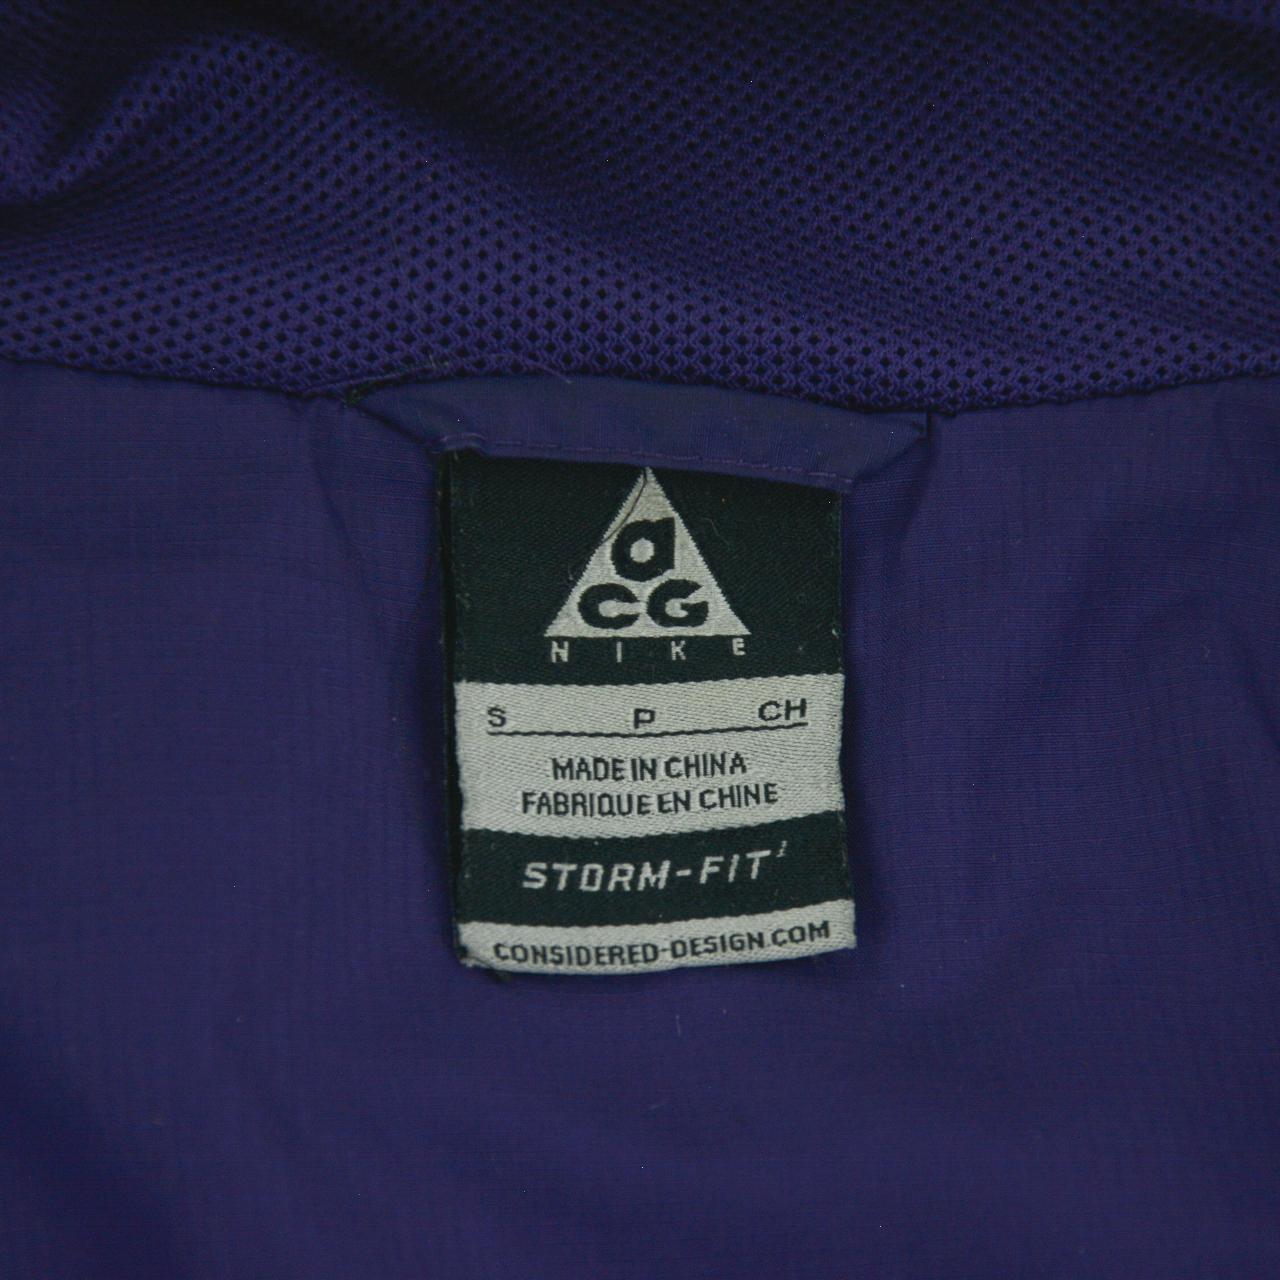 Vintage Nike ACG Jacket Woman’s Size S - Known Source